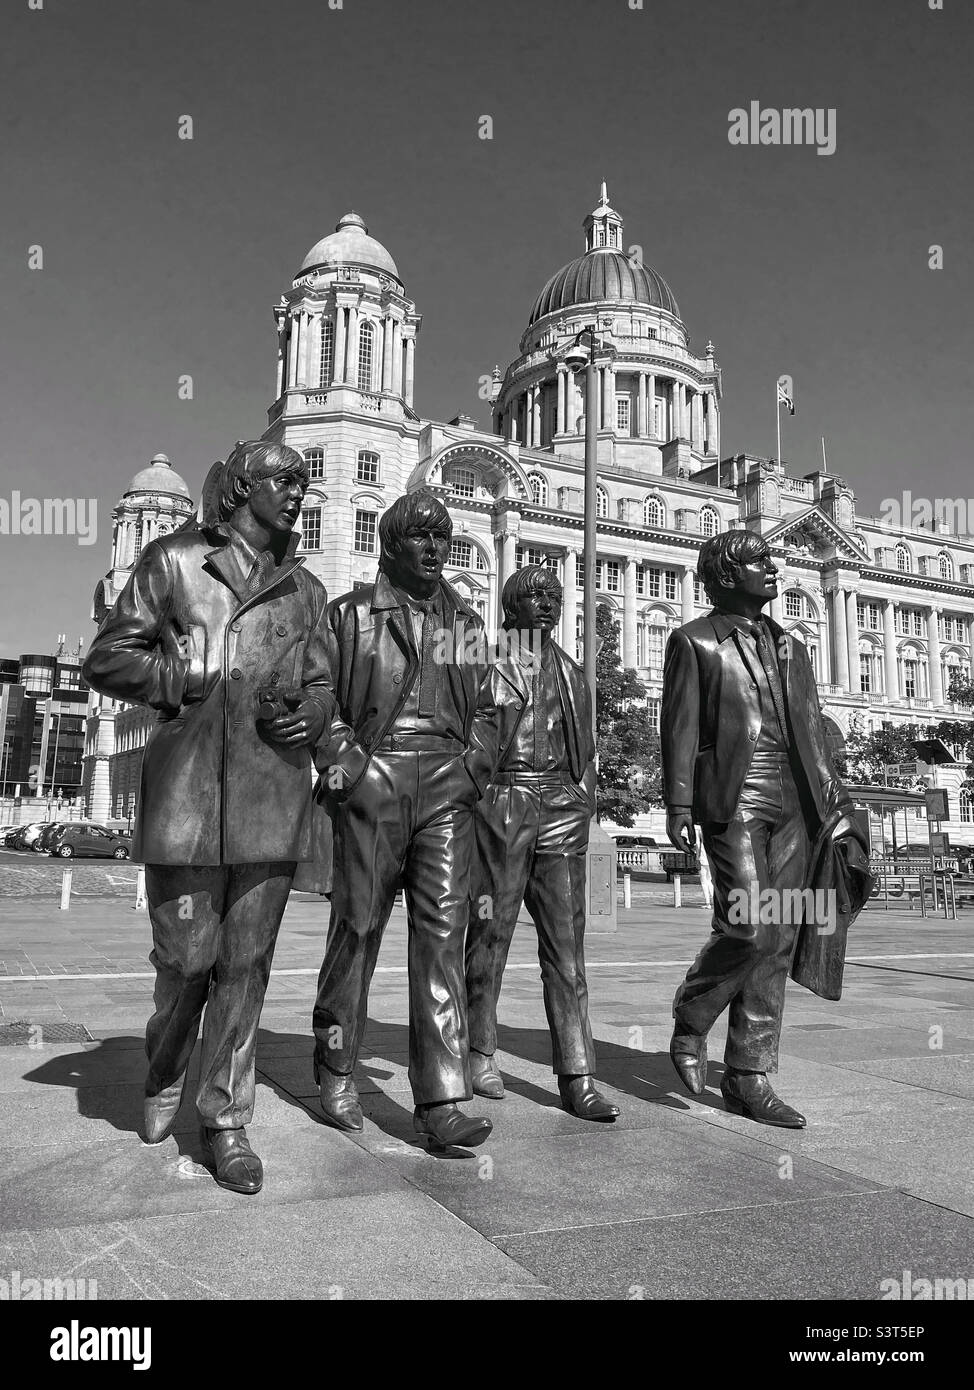 The bronze statues of The Beetles created by Andy Edwards & unveiled in Dec.2015. Situated at the Pier Head outside The Liver Building. Paul McCartney, John Lennon, Ringo Star, George Harrison. ©️ Stock Photo